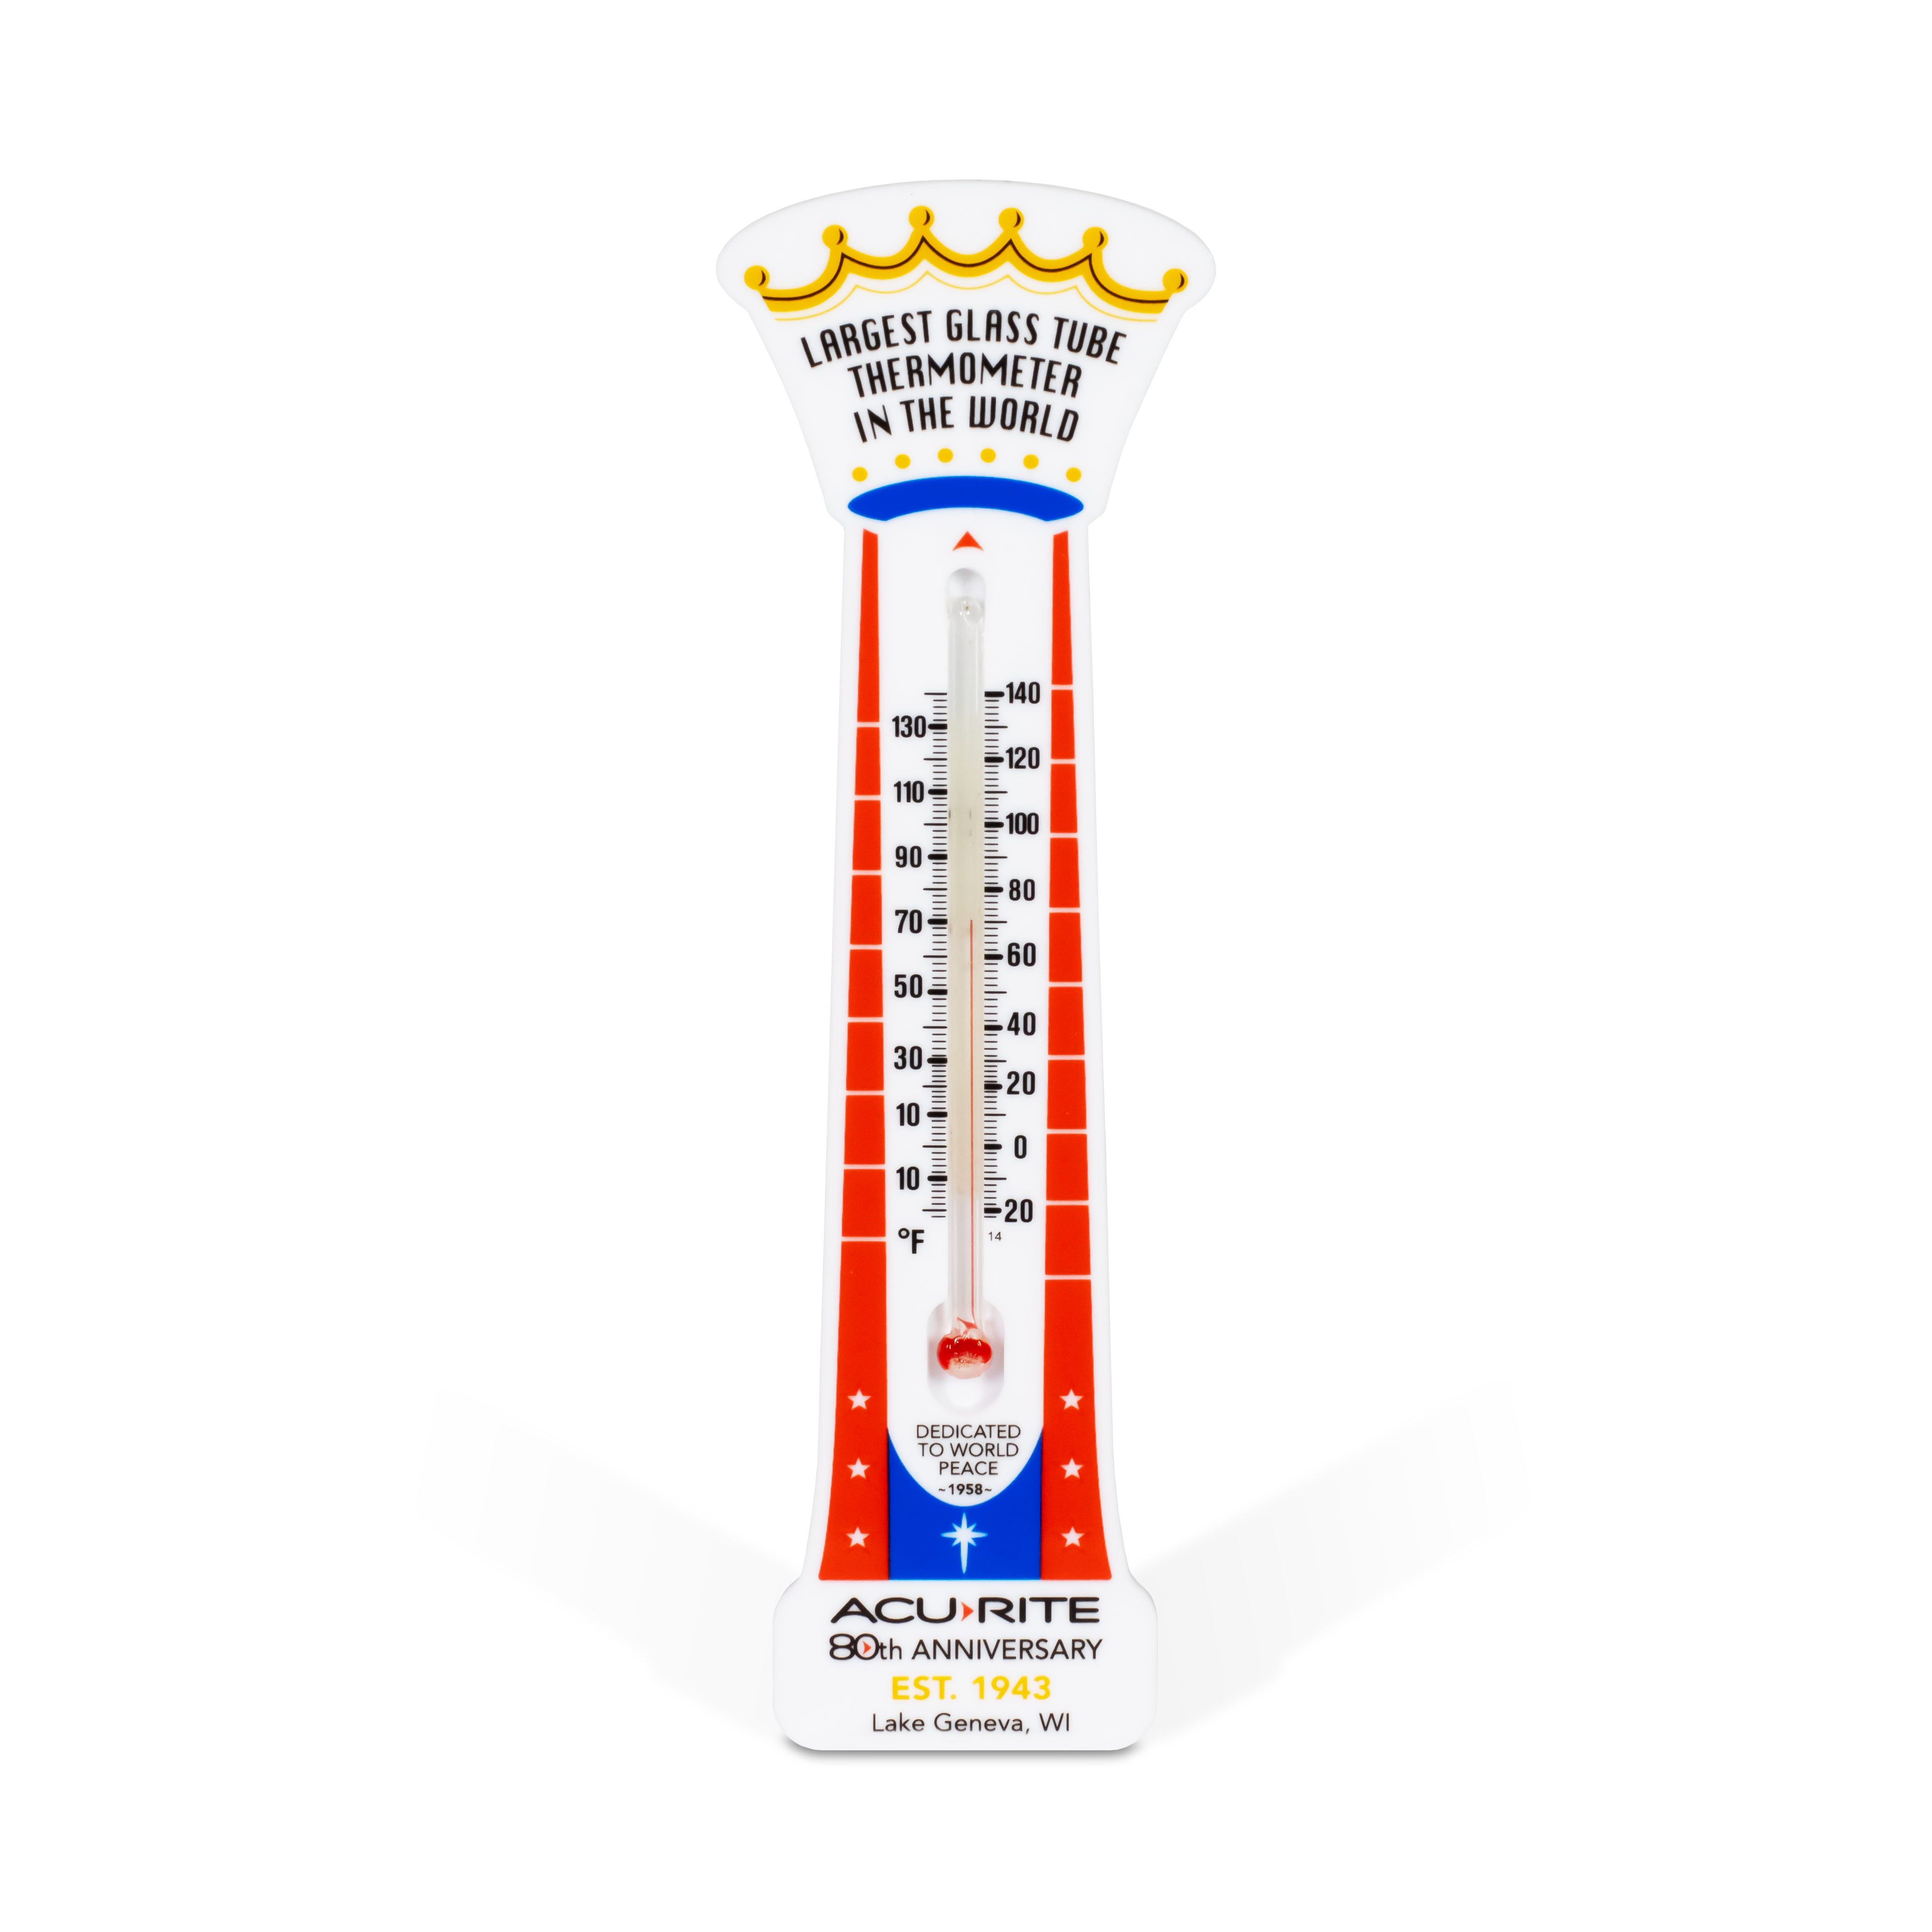 80th Anniversary 7-Inch Replica of the World's Largest Glass Tube Thermometer